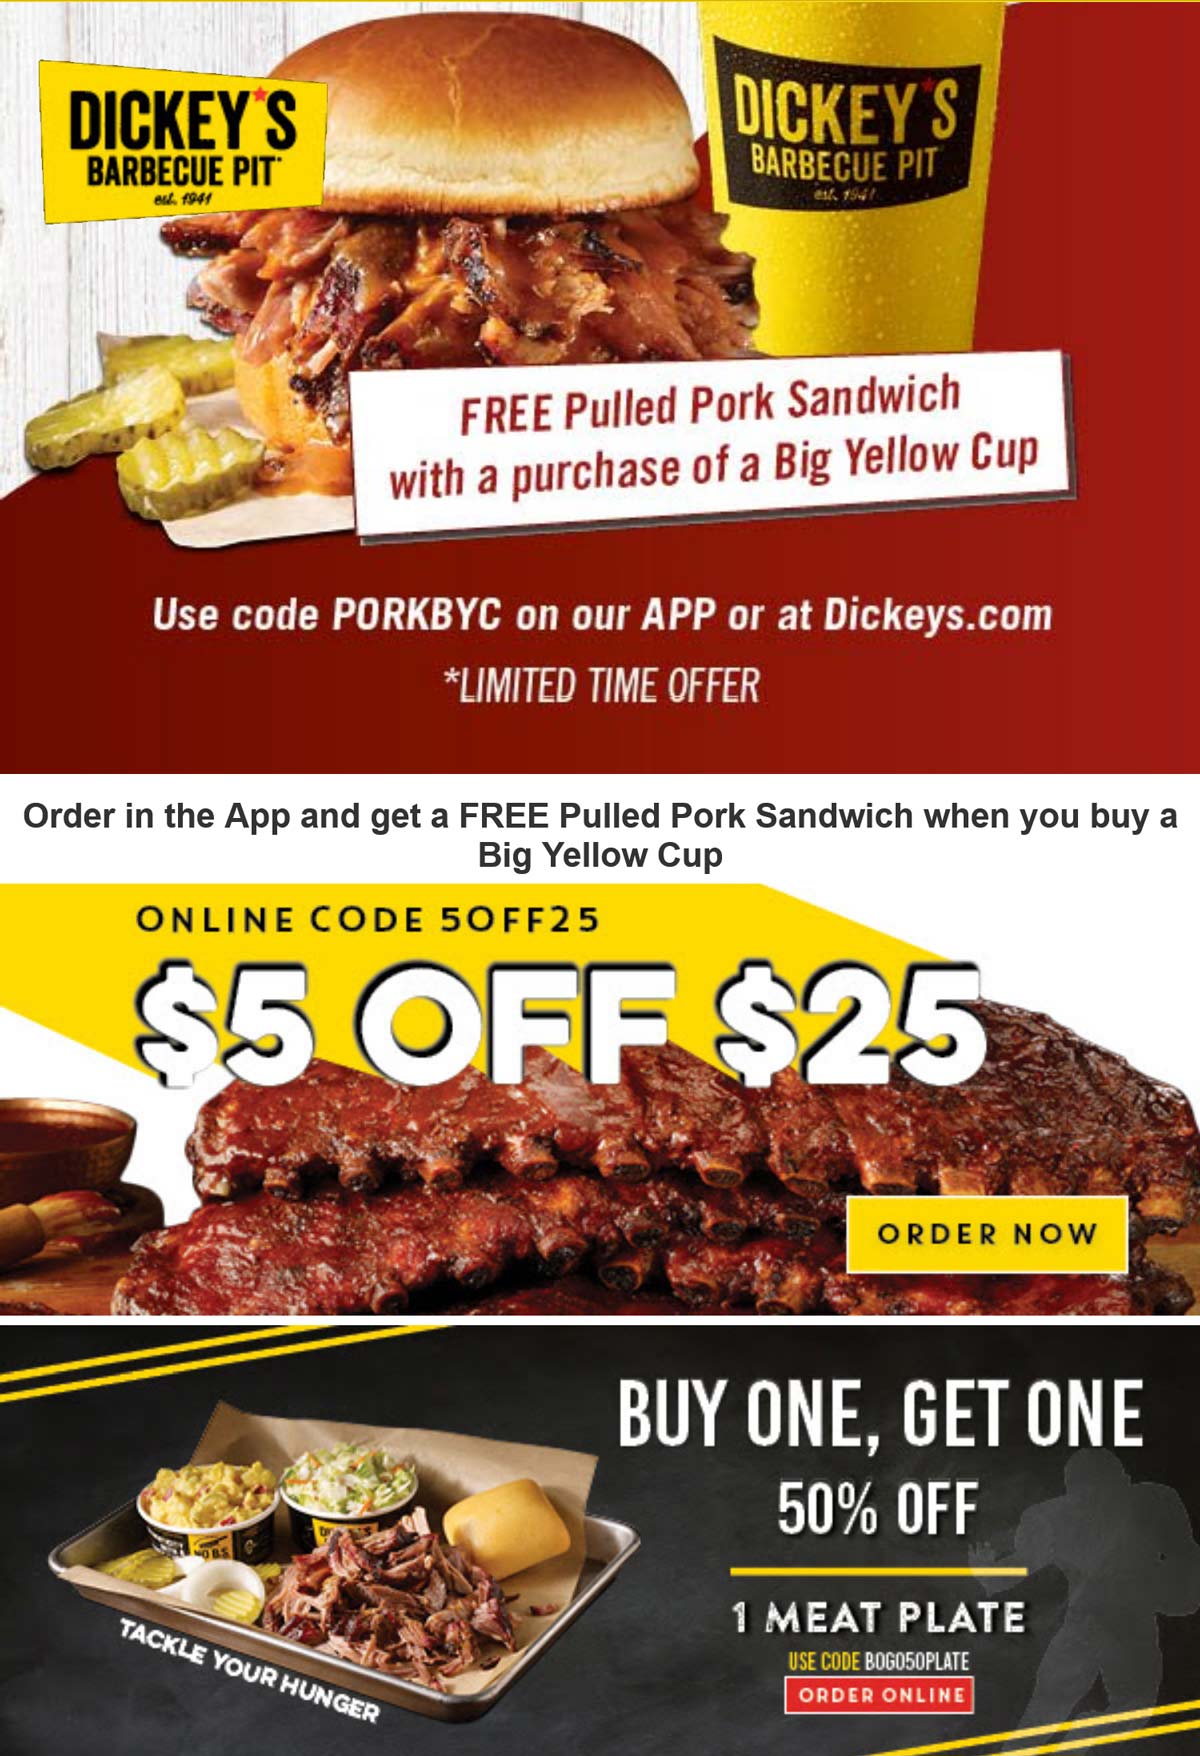 Dickeys Barbecue Pit restaurants Coupon  Free pulled pork sandwich with your cup online at Dickeys Barbecue Pit via promo code PORKBYC #dickeysbarbecuepit 